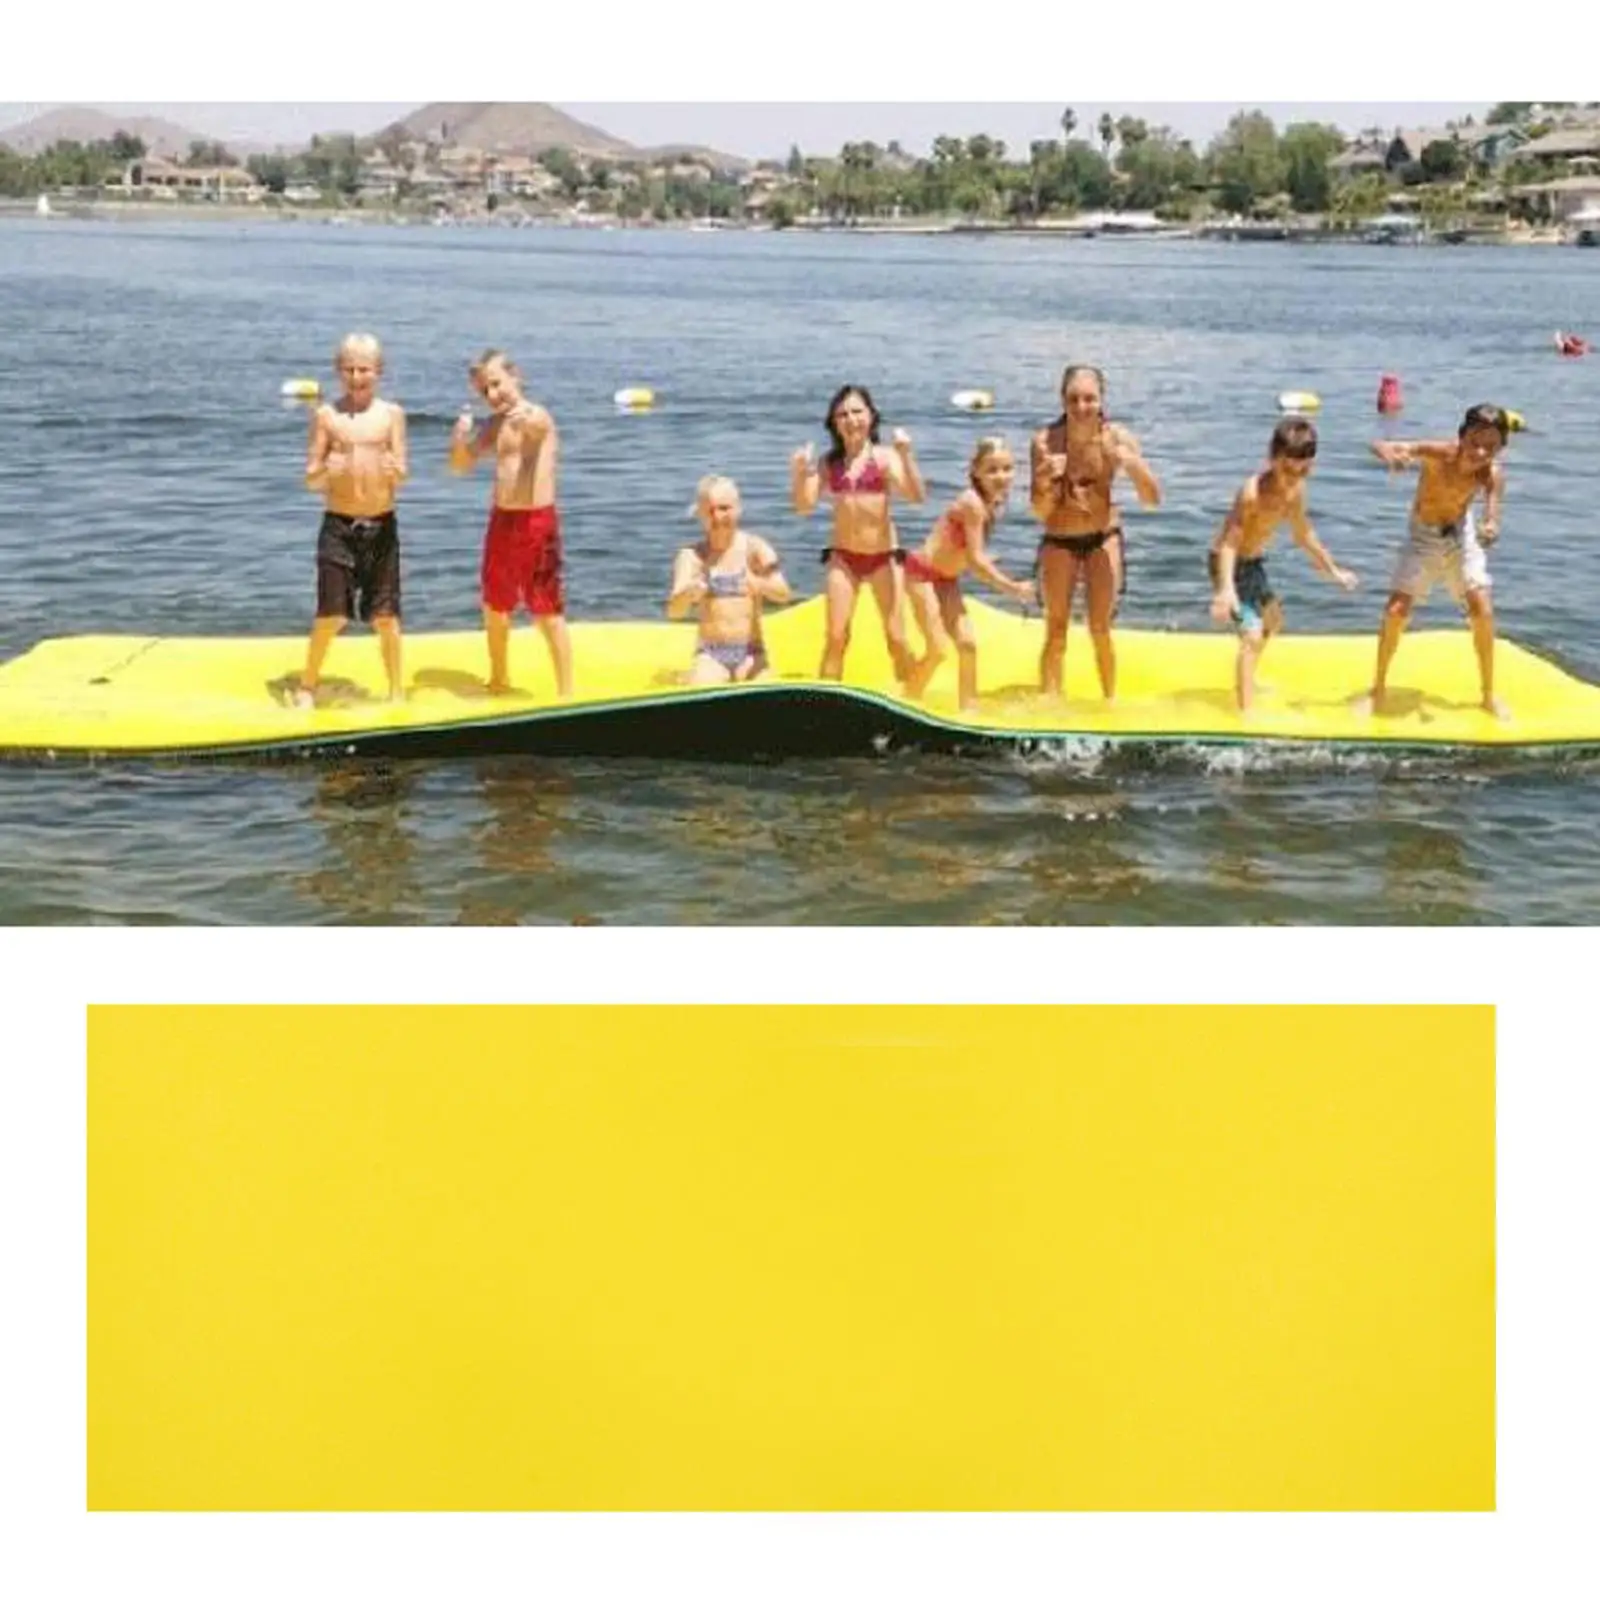 3 Layers Floating Oasis Water Pad Island Float Water Sports Mat